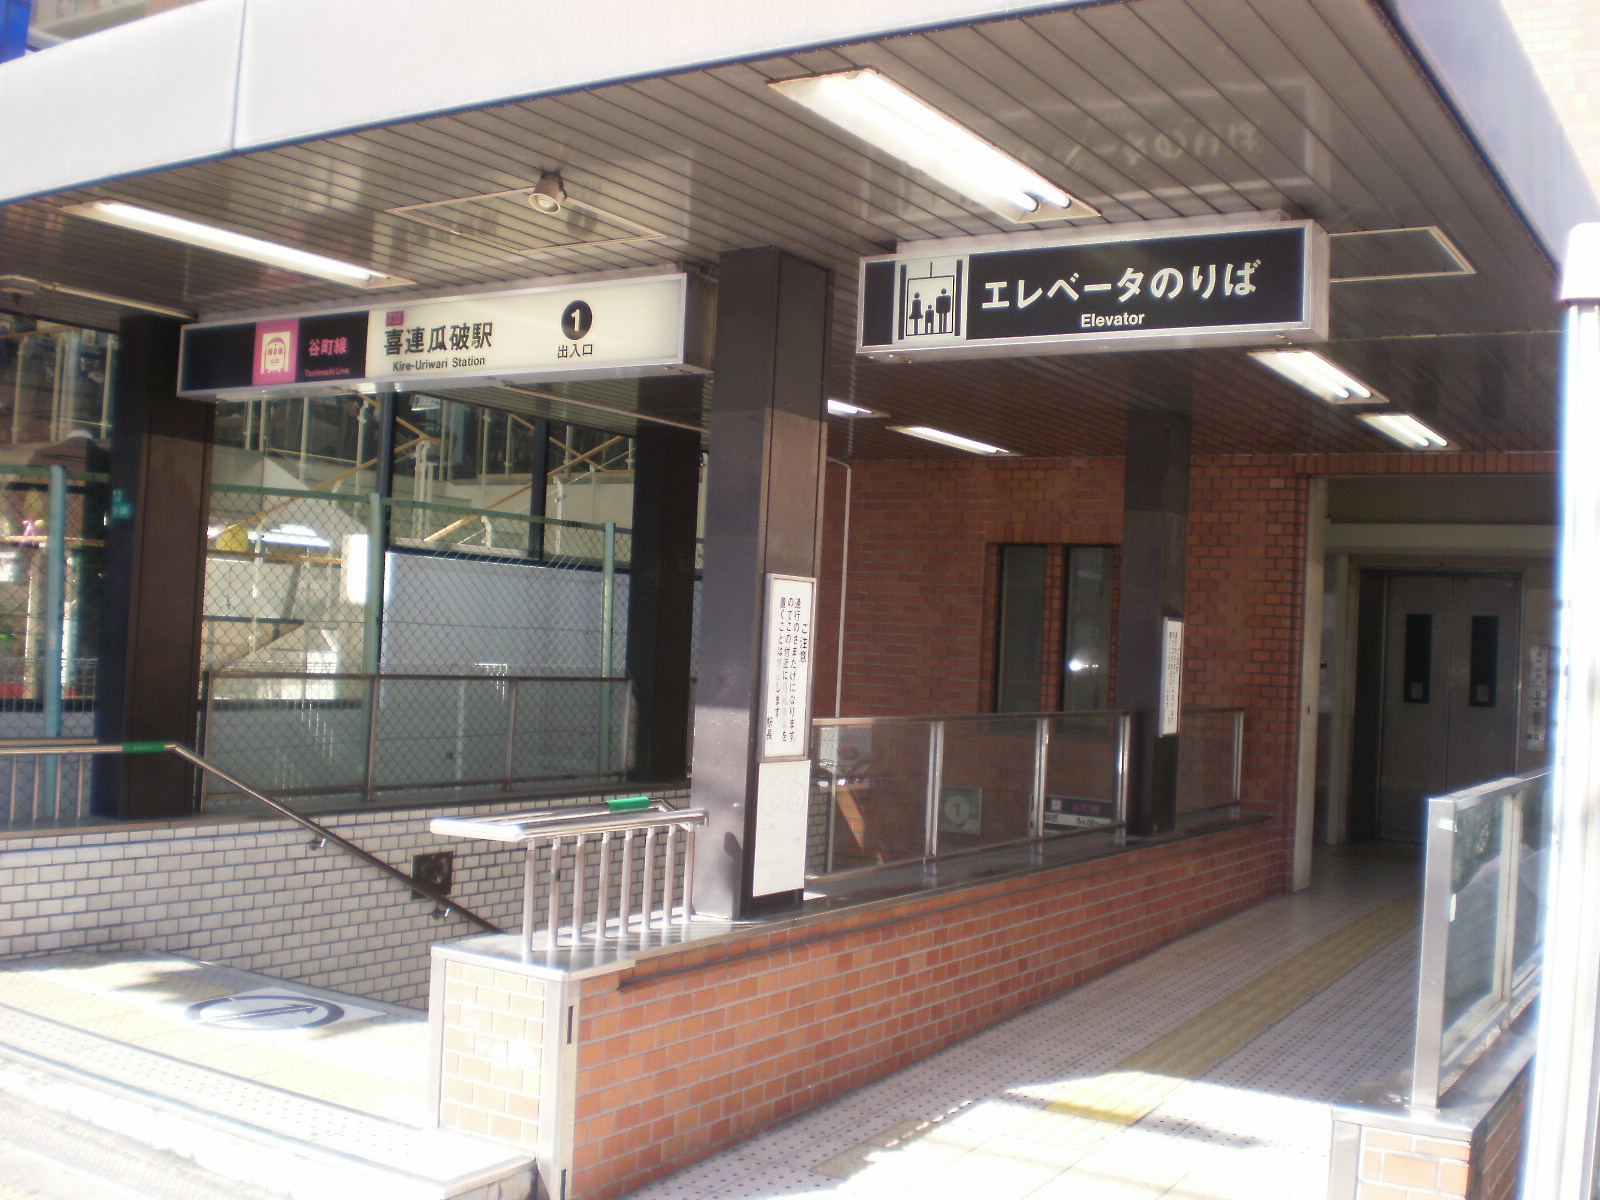 Other. Kire-Uriwari Station No. 1 doorway (other) up to 170m